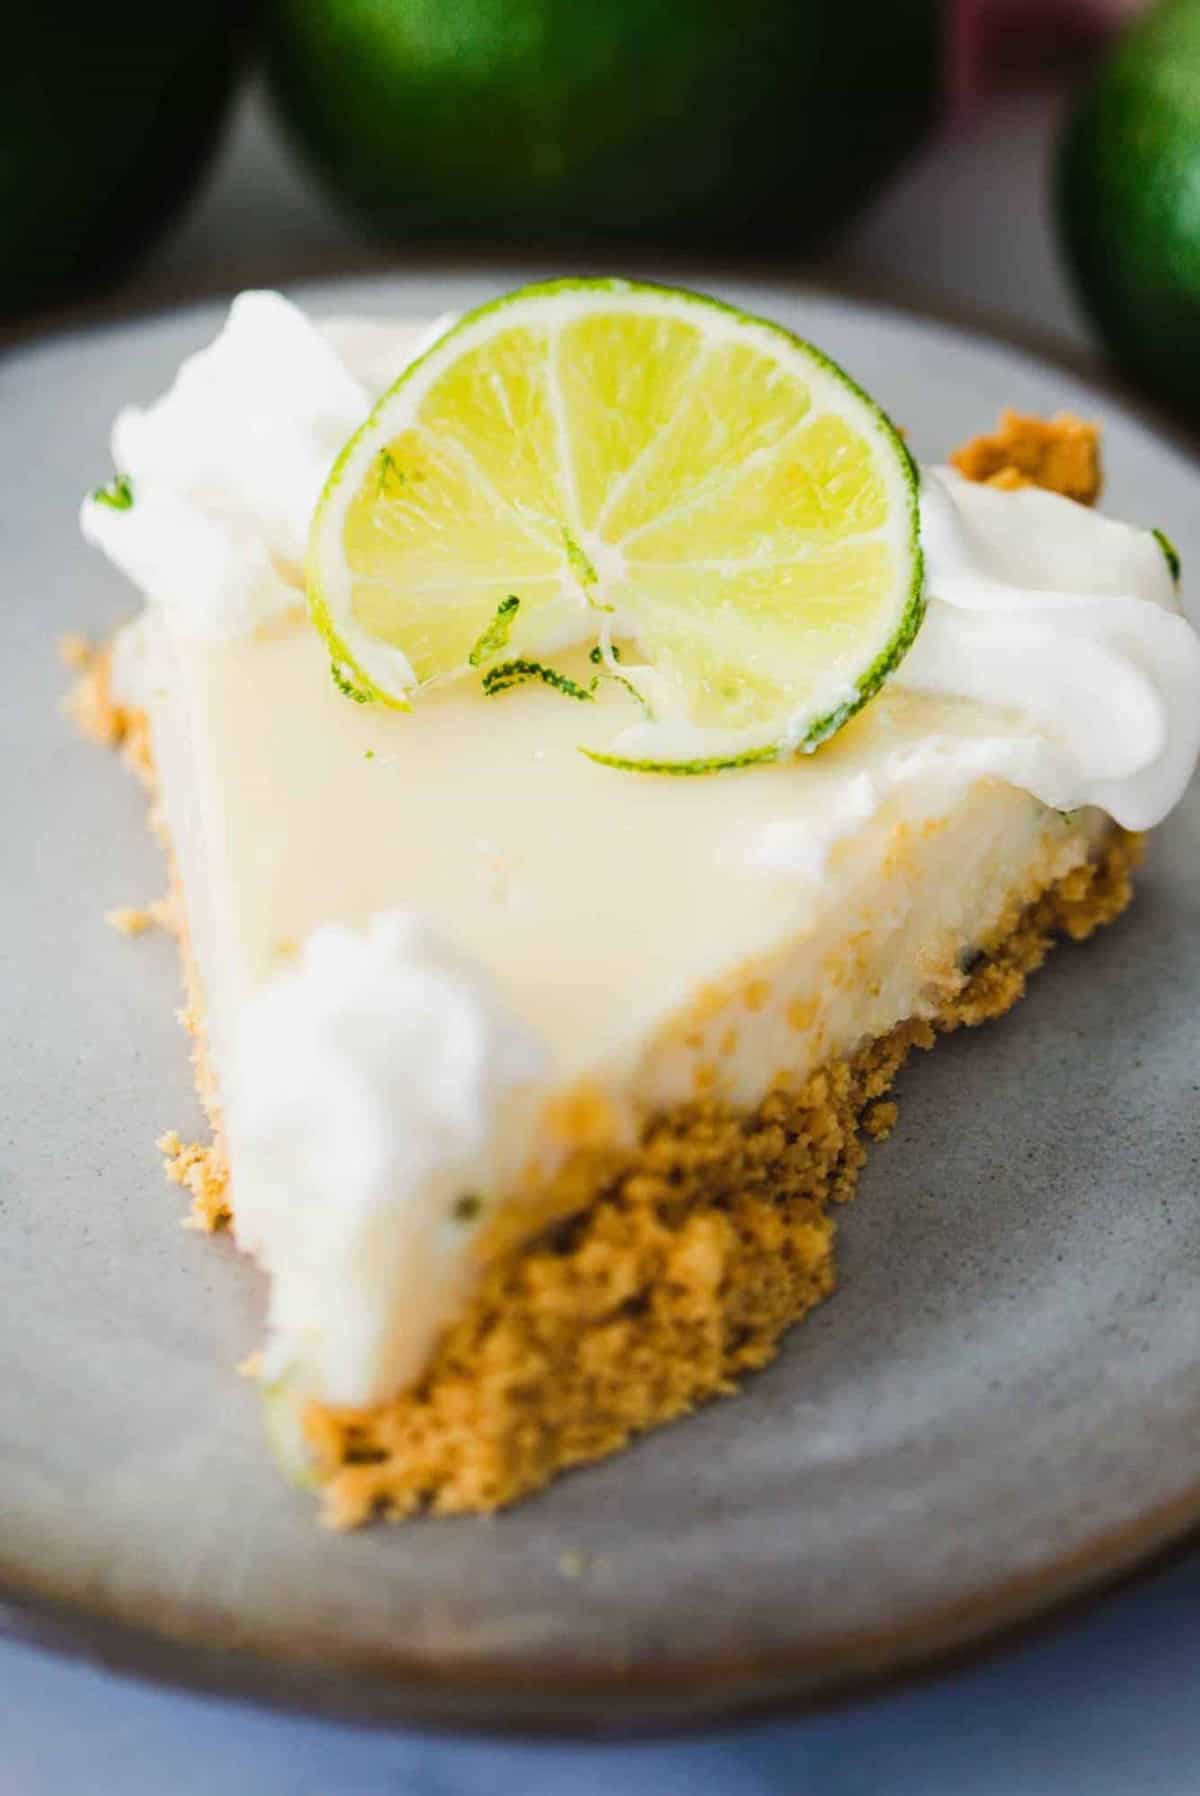 Slice of Key Lime pie sits on a plate ready to enjoy.